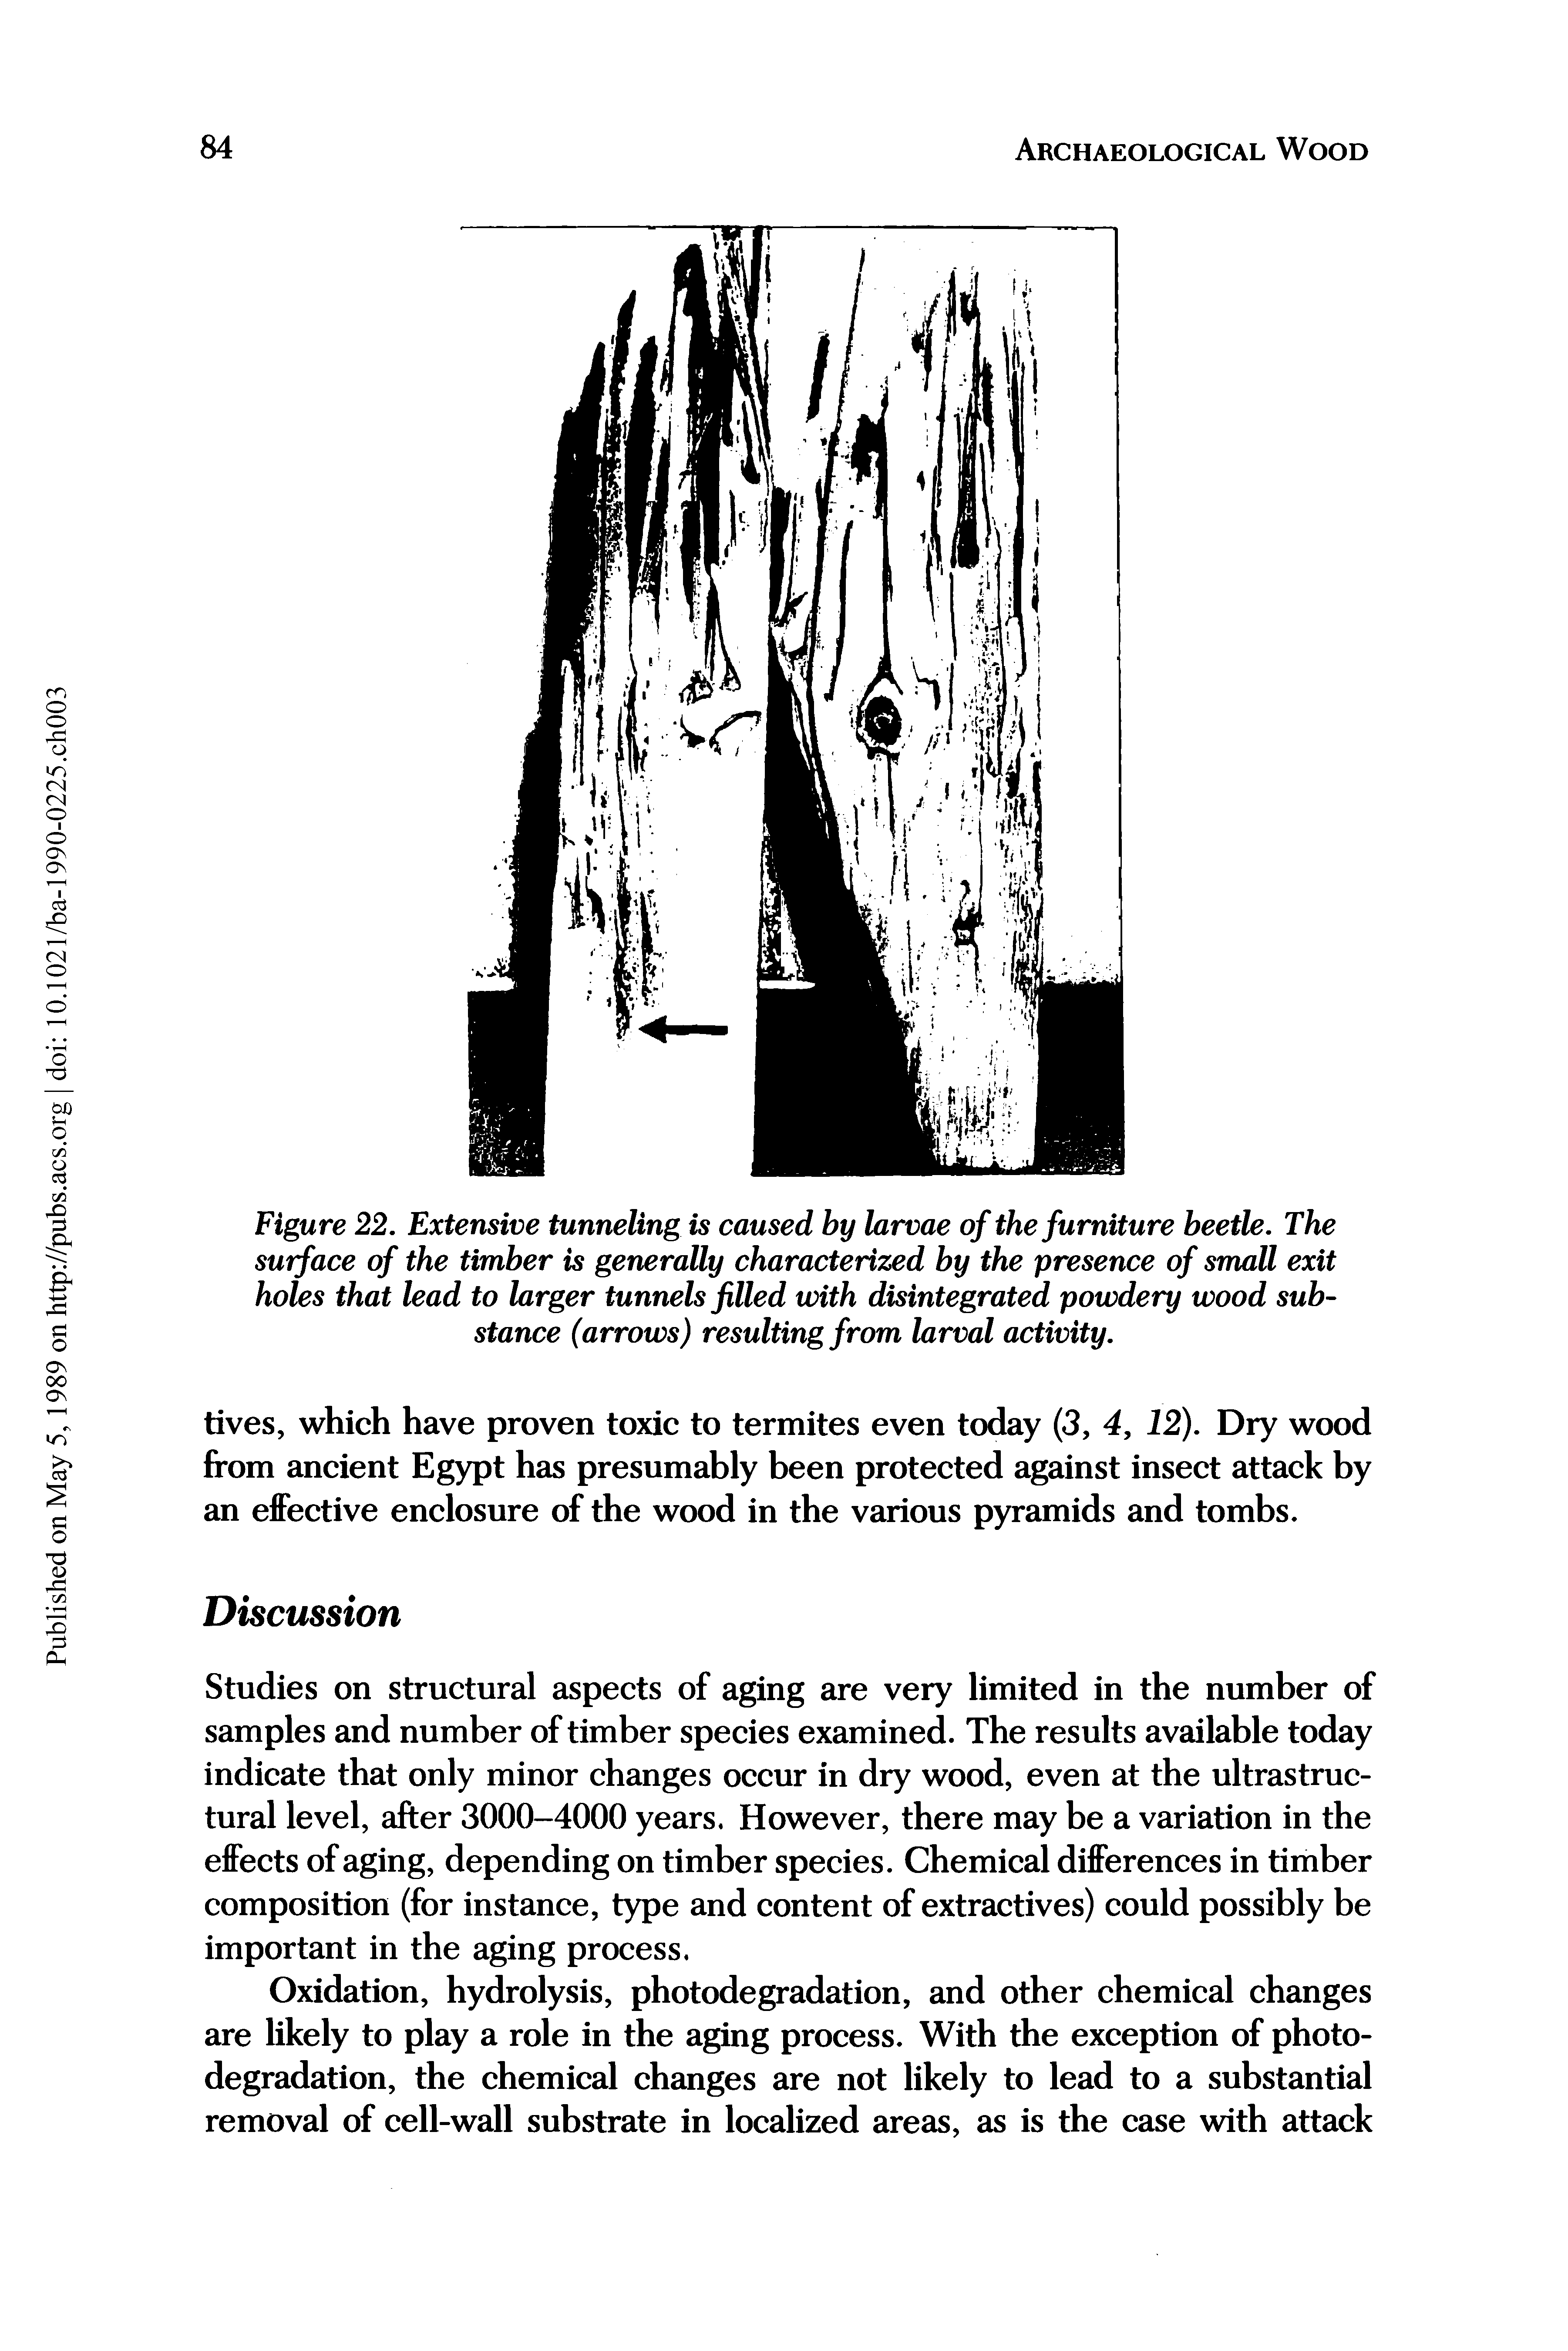 Figure 22. Extensive tunneling is caused by larvae of the furniture beetle. The surface of the timber is generally characterized by the presence of small exit holes that lead to larger tunnels filled with disintegrated powdery wood substance (arrows) resulting from larval activity.